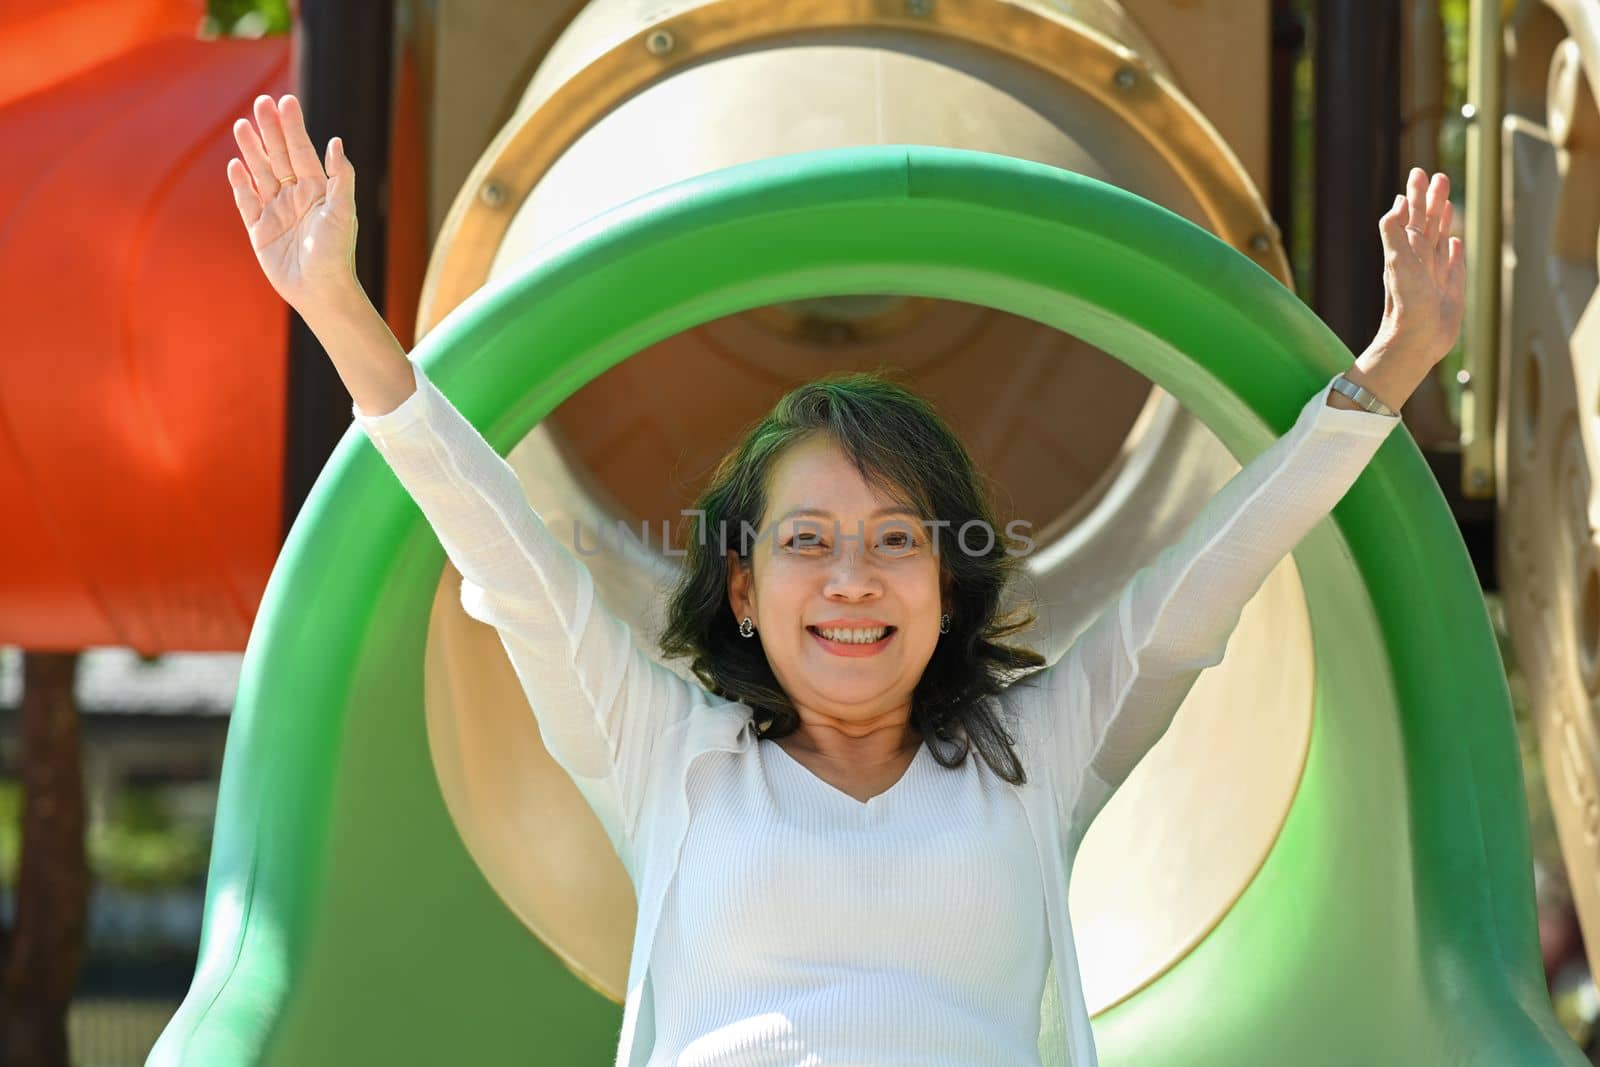 Overjoyed mature grandma having fun on colorful slide. Happy moment, family and love concept.